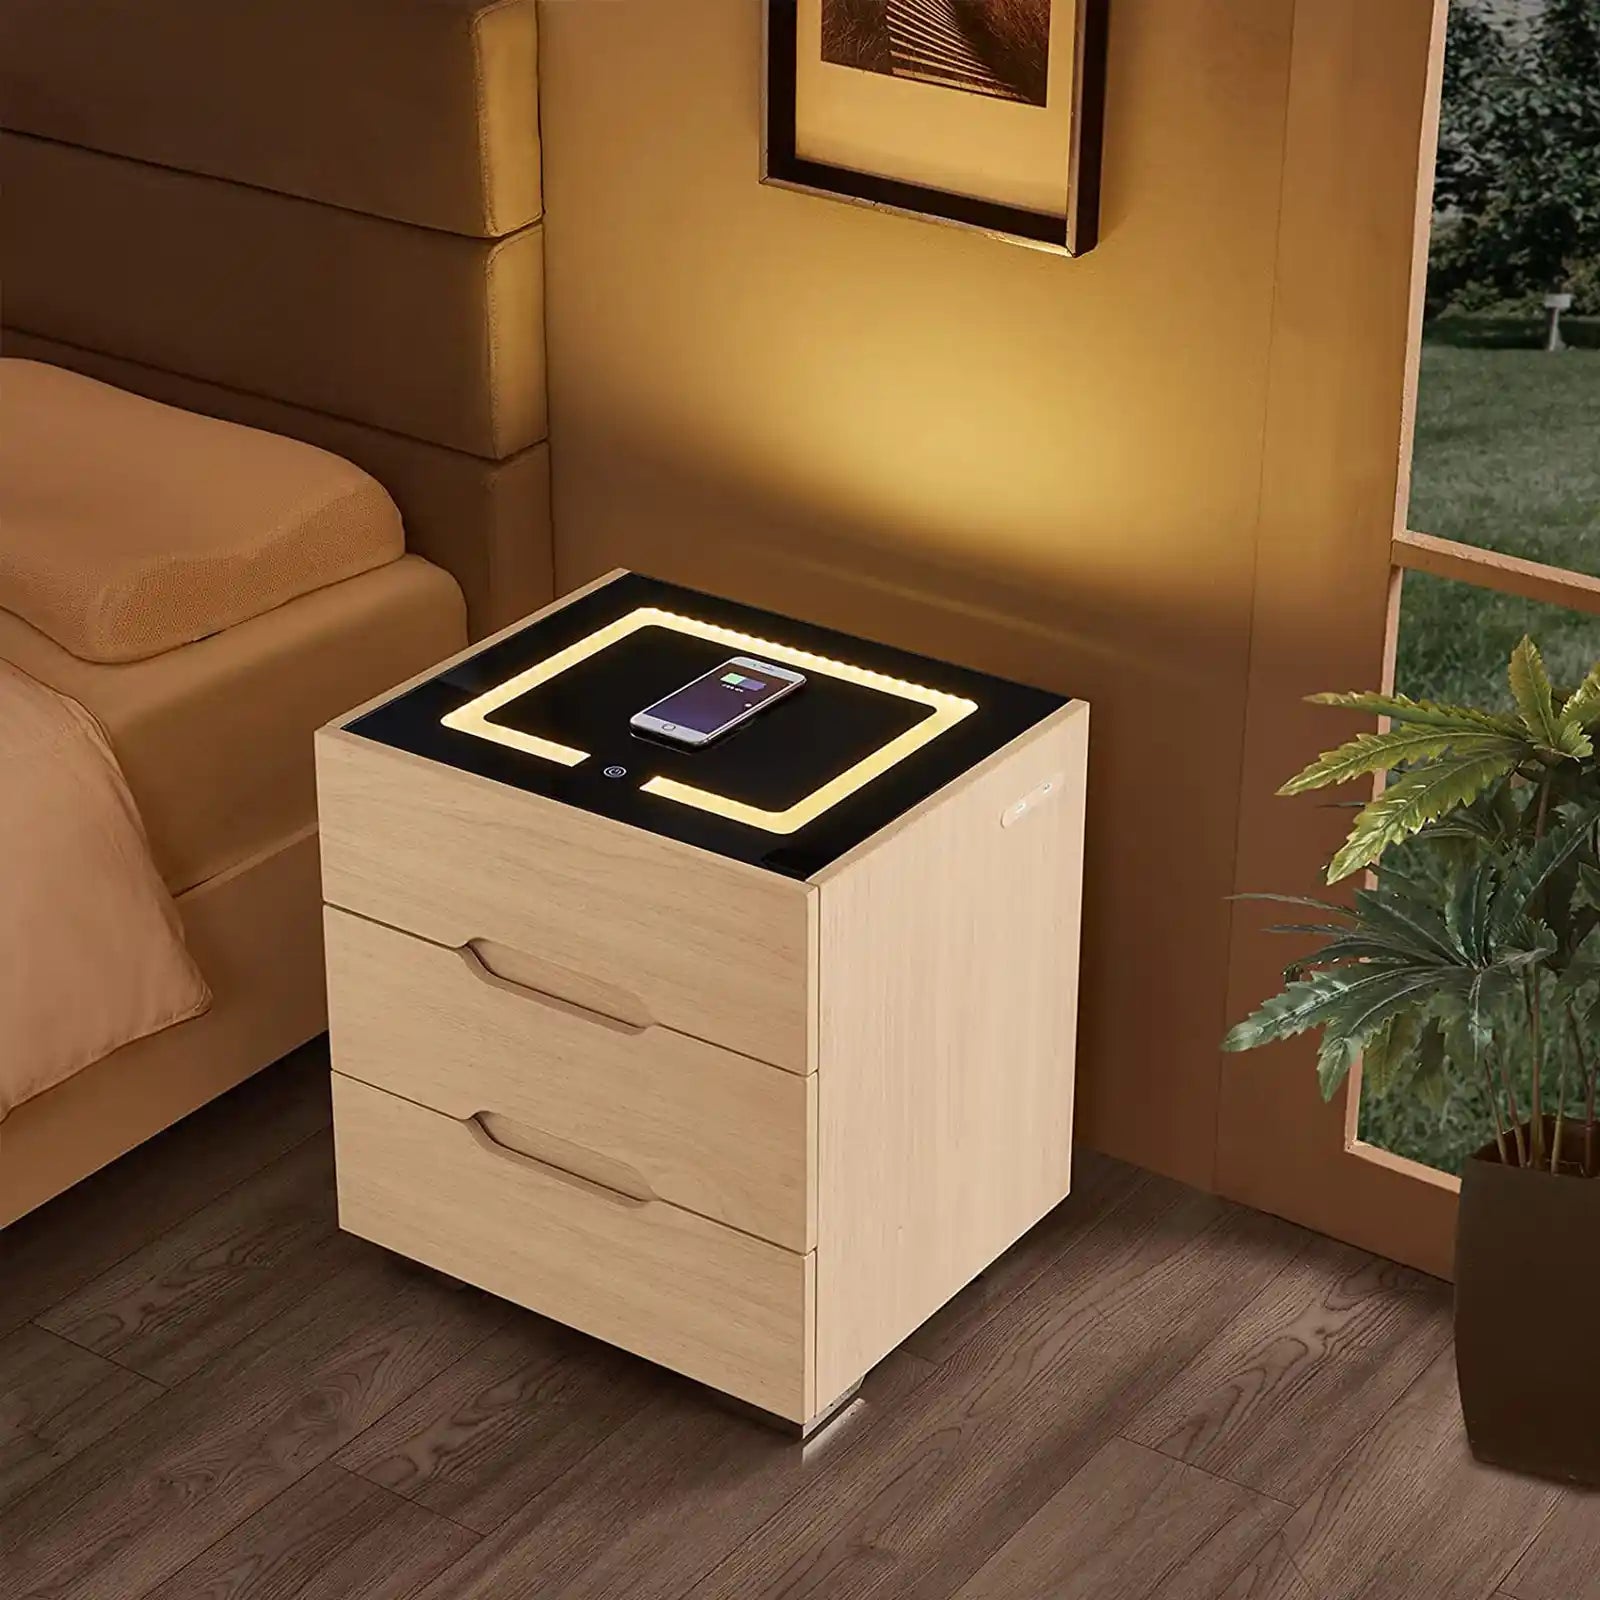 Modern Smart Side Table with Built-in Fridge, Nightstands with Wireless  Charging Temperature Control Power Socket USB Interface Outlet Protection